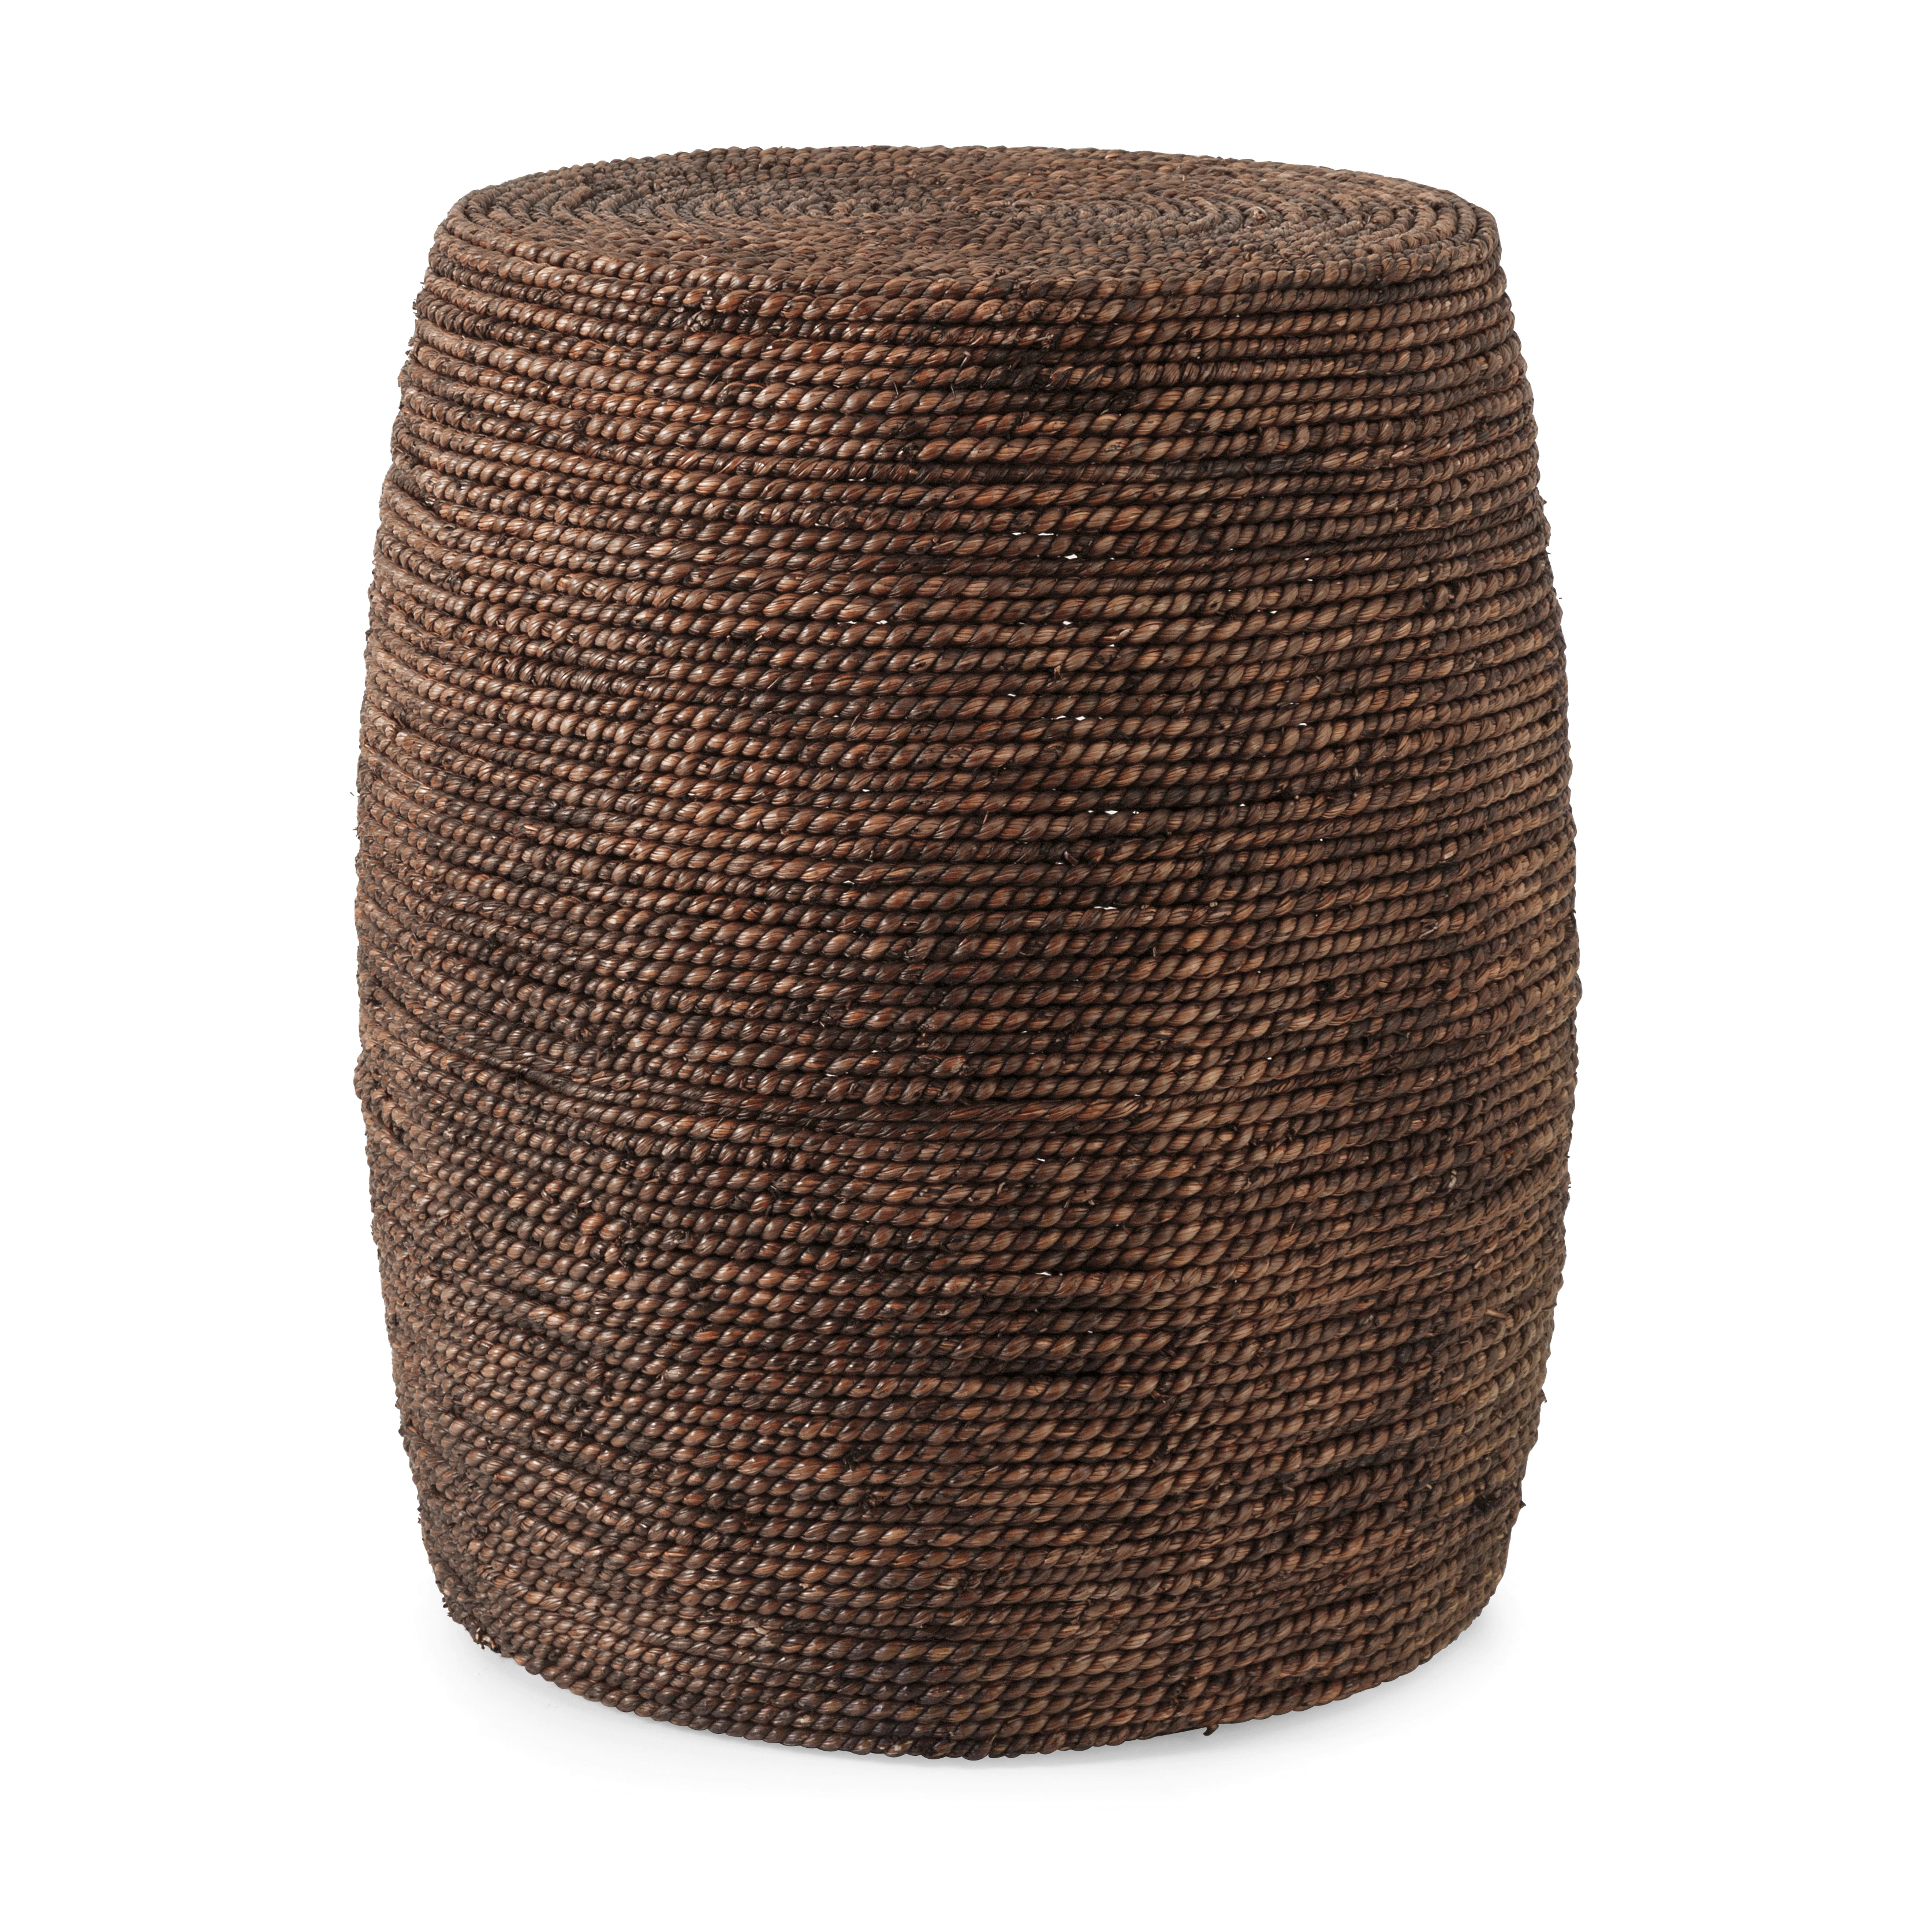 find imax available the living room furniture section kmart prod bedford jute rope accent table corporation camotes seagrass ott brown target threshold windham white dining